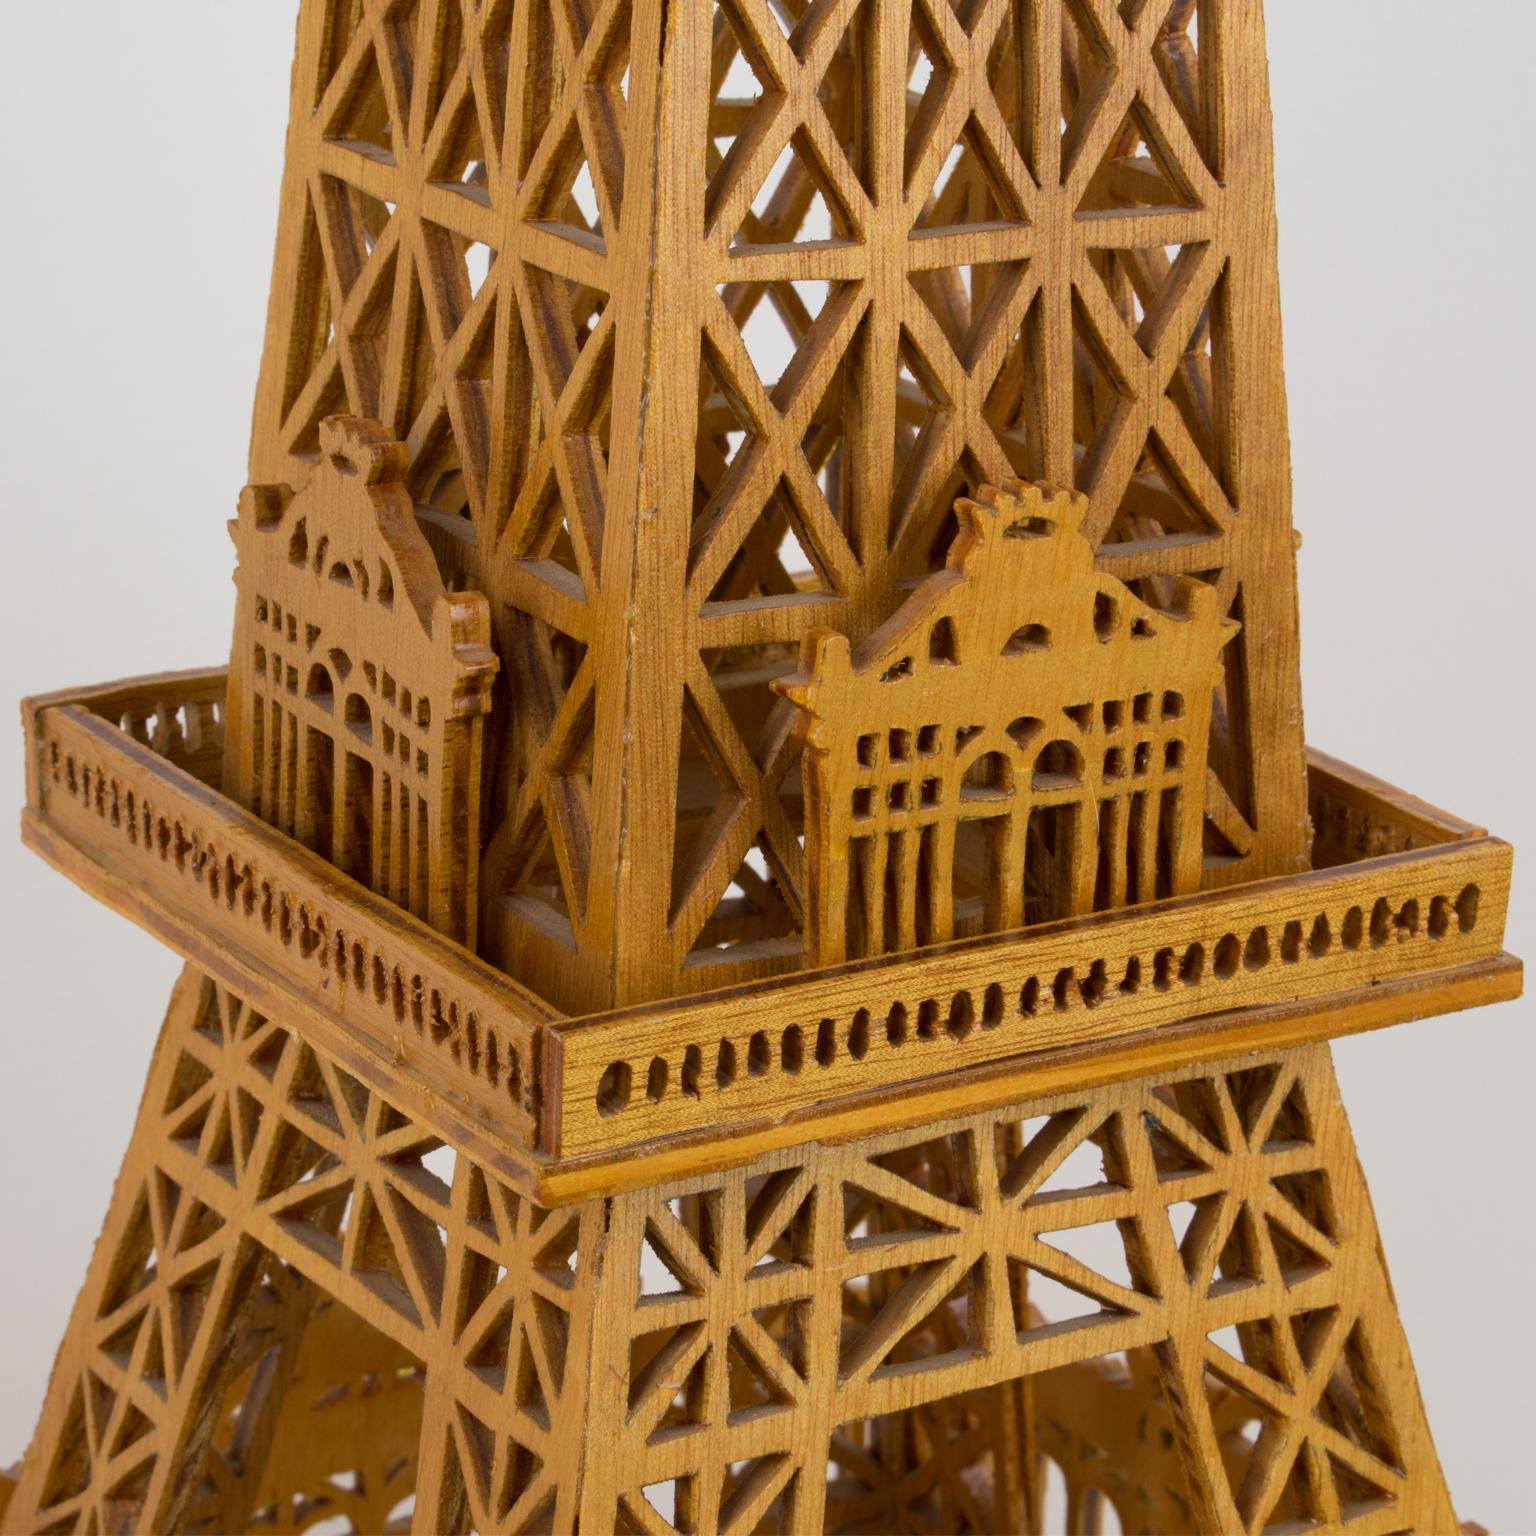 French Hand-Carved Wooden Eiffel Tower Model Miniature Sculpture 8